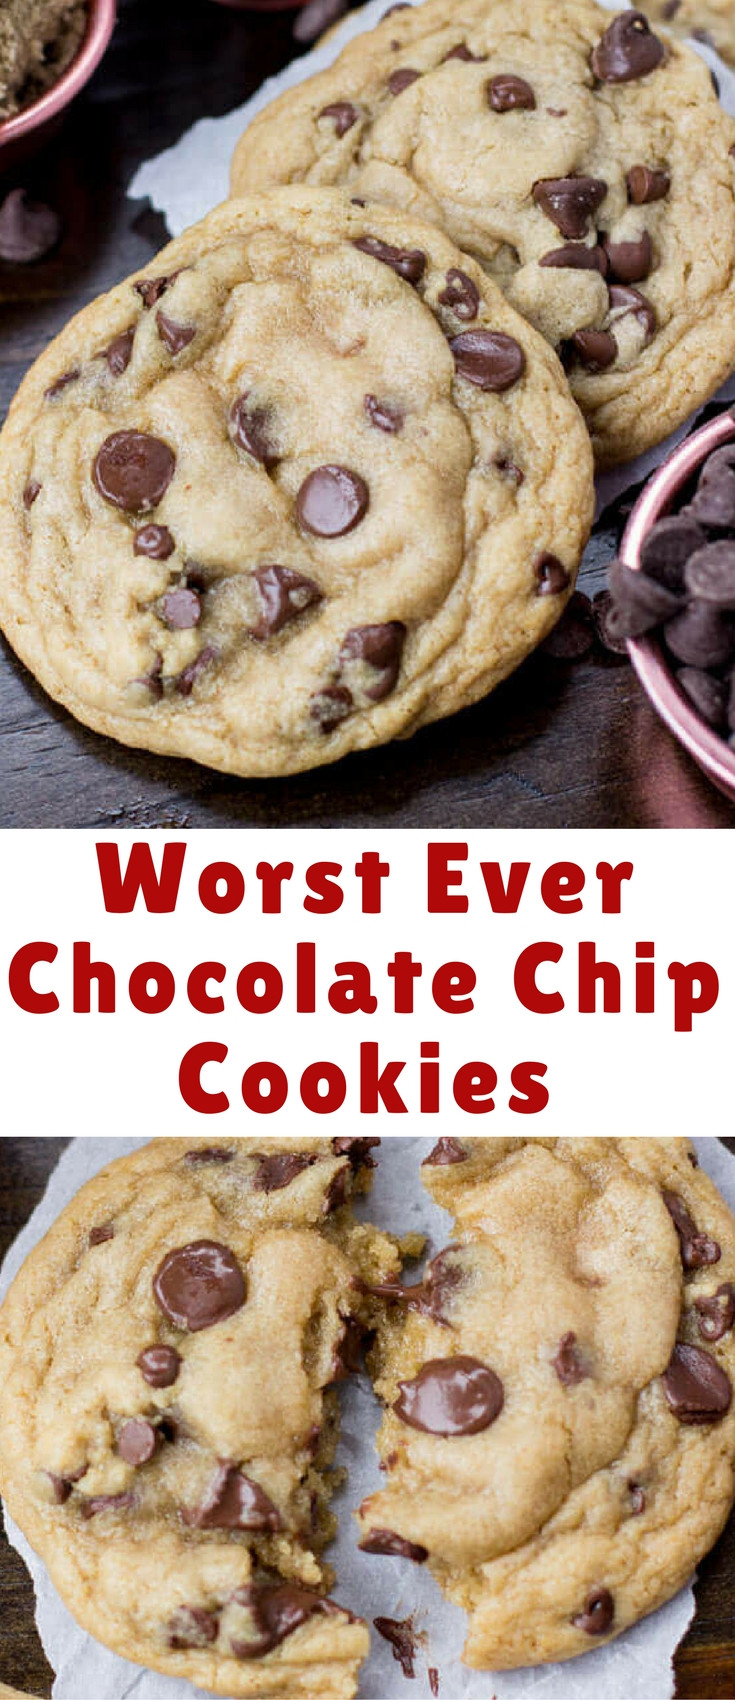 The Worst Chocolate Chip Cookies
 The WORST EVER Chocolate Chip Cookies Blogger Bests